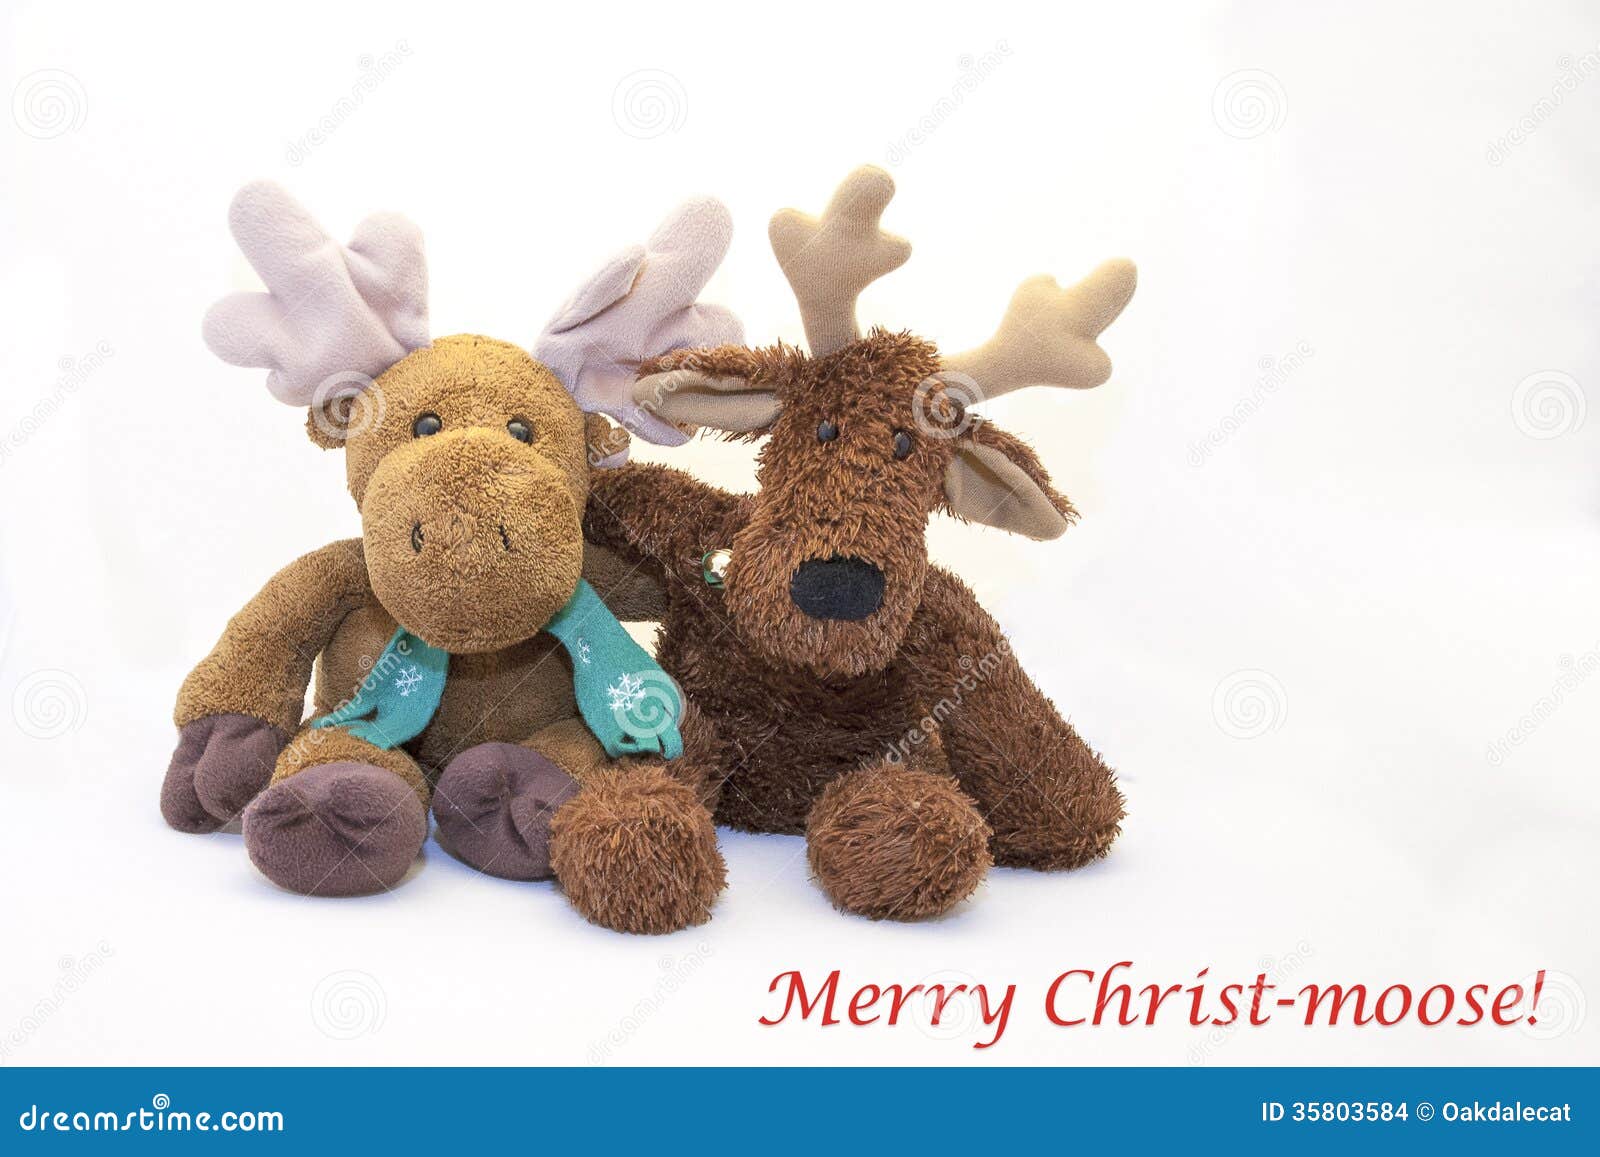 Christmas Greeting Card:Merry Christ-moose! Stock Images 